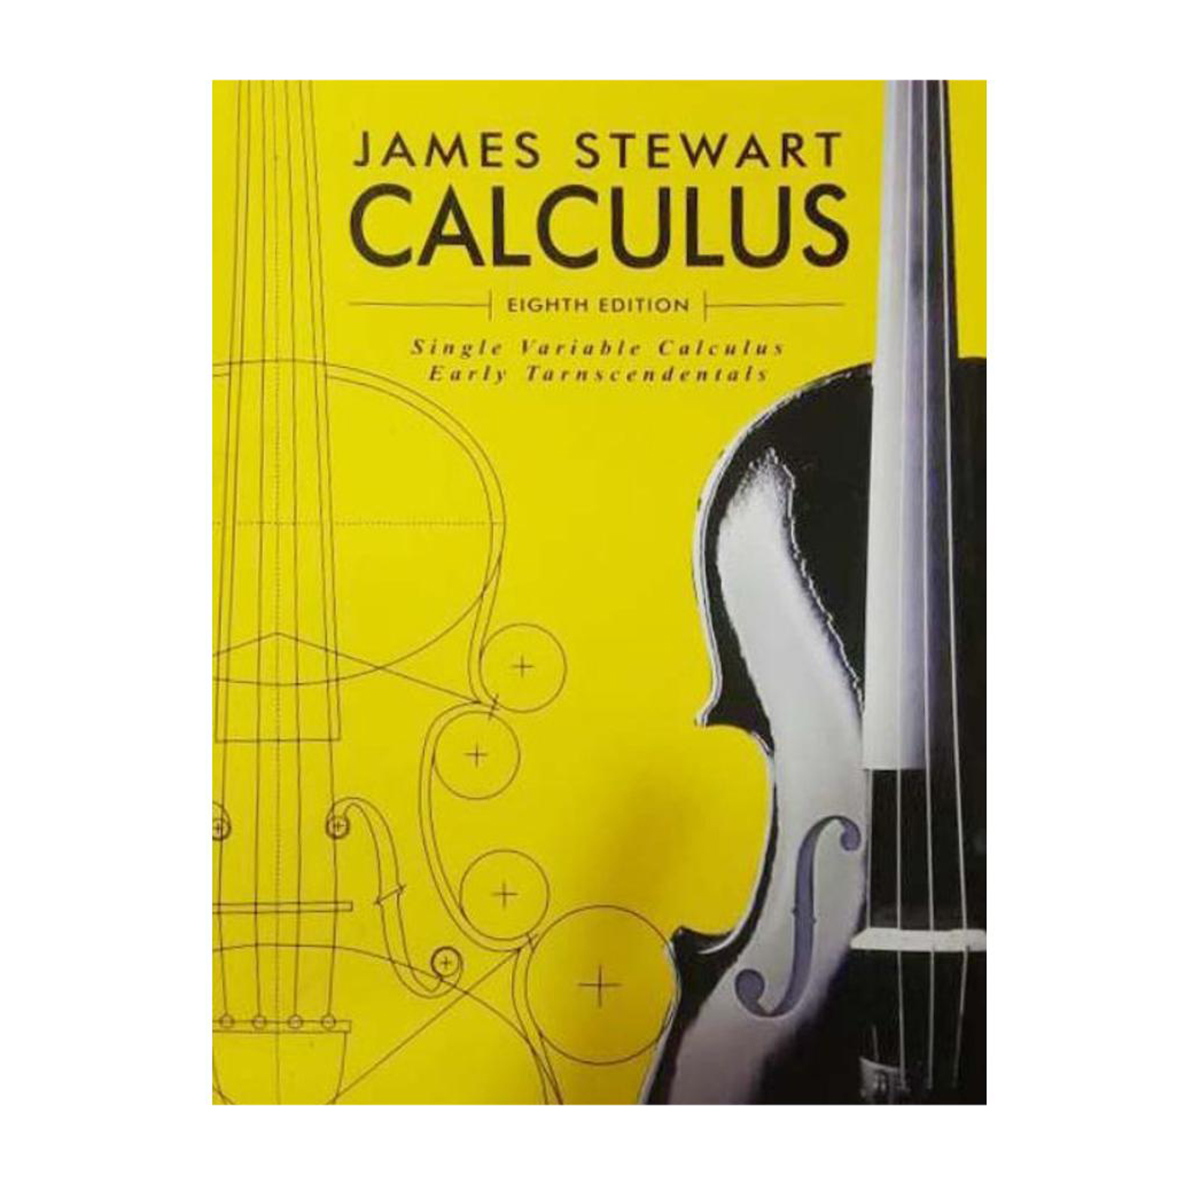 Calculus by James Stewart ( 8th Edition )